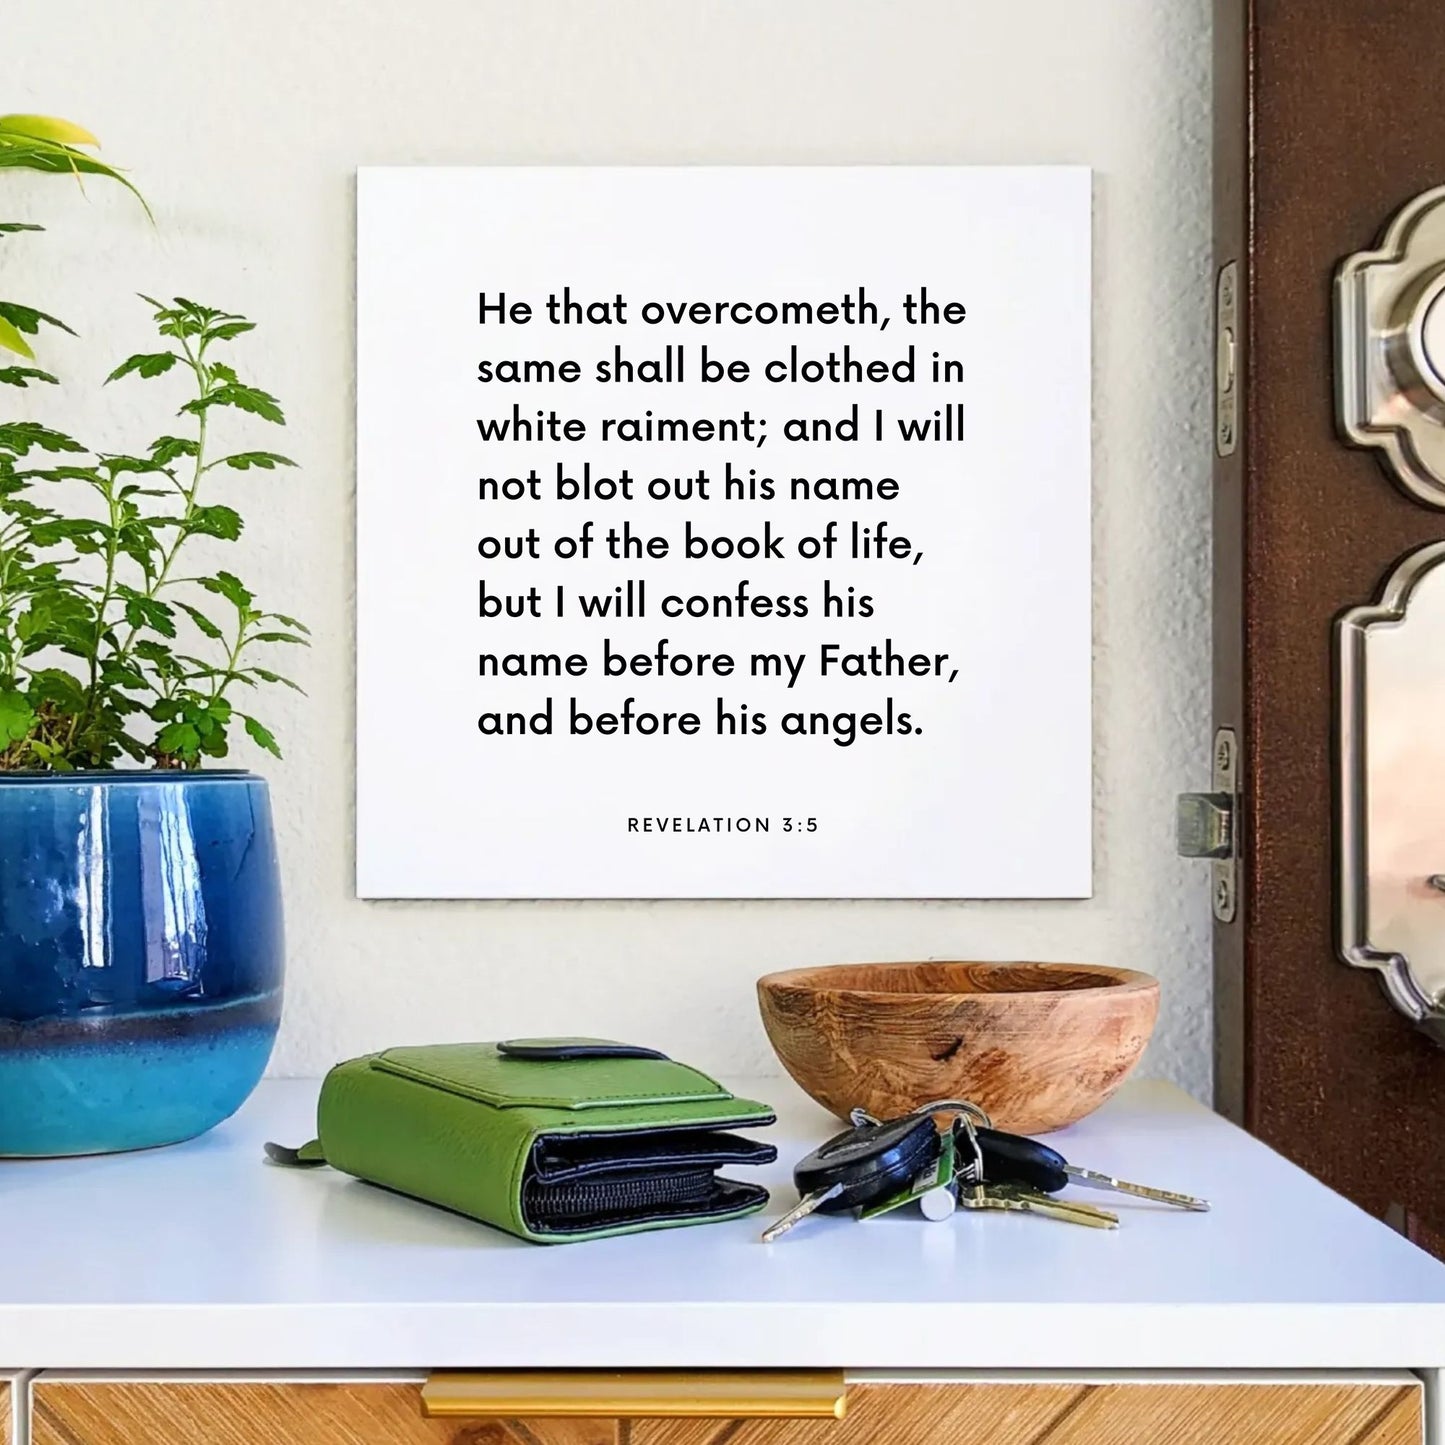 Entryway mouting of the scripture tile for Revelation 3:5 - "I will confess his name before my Father"